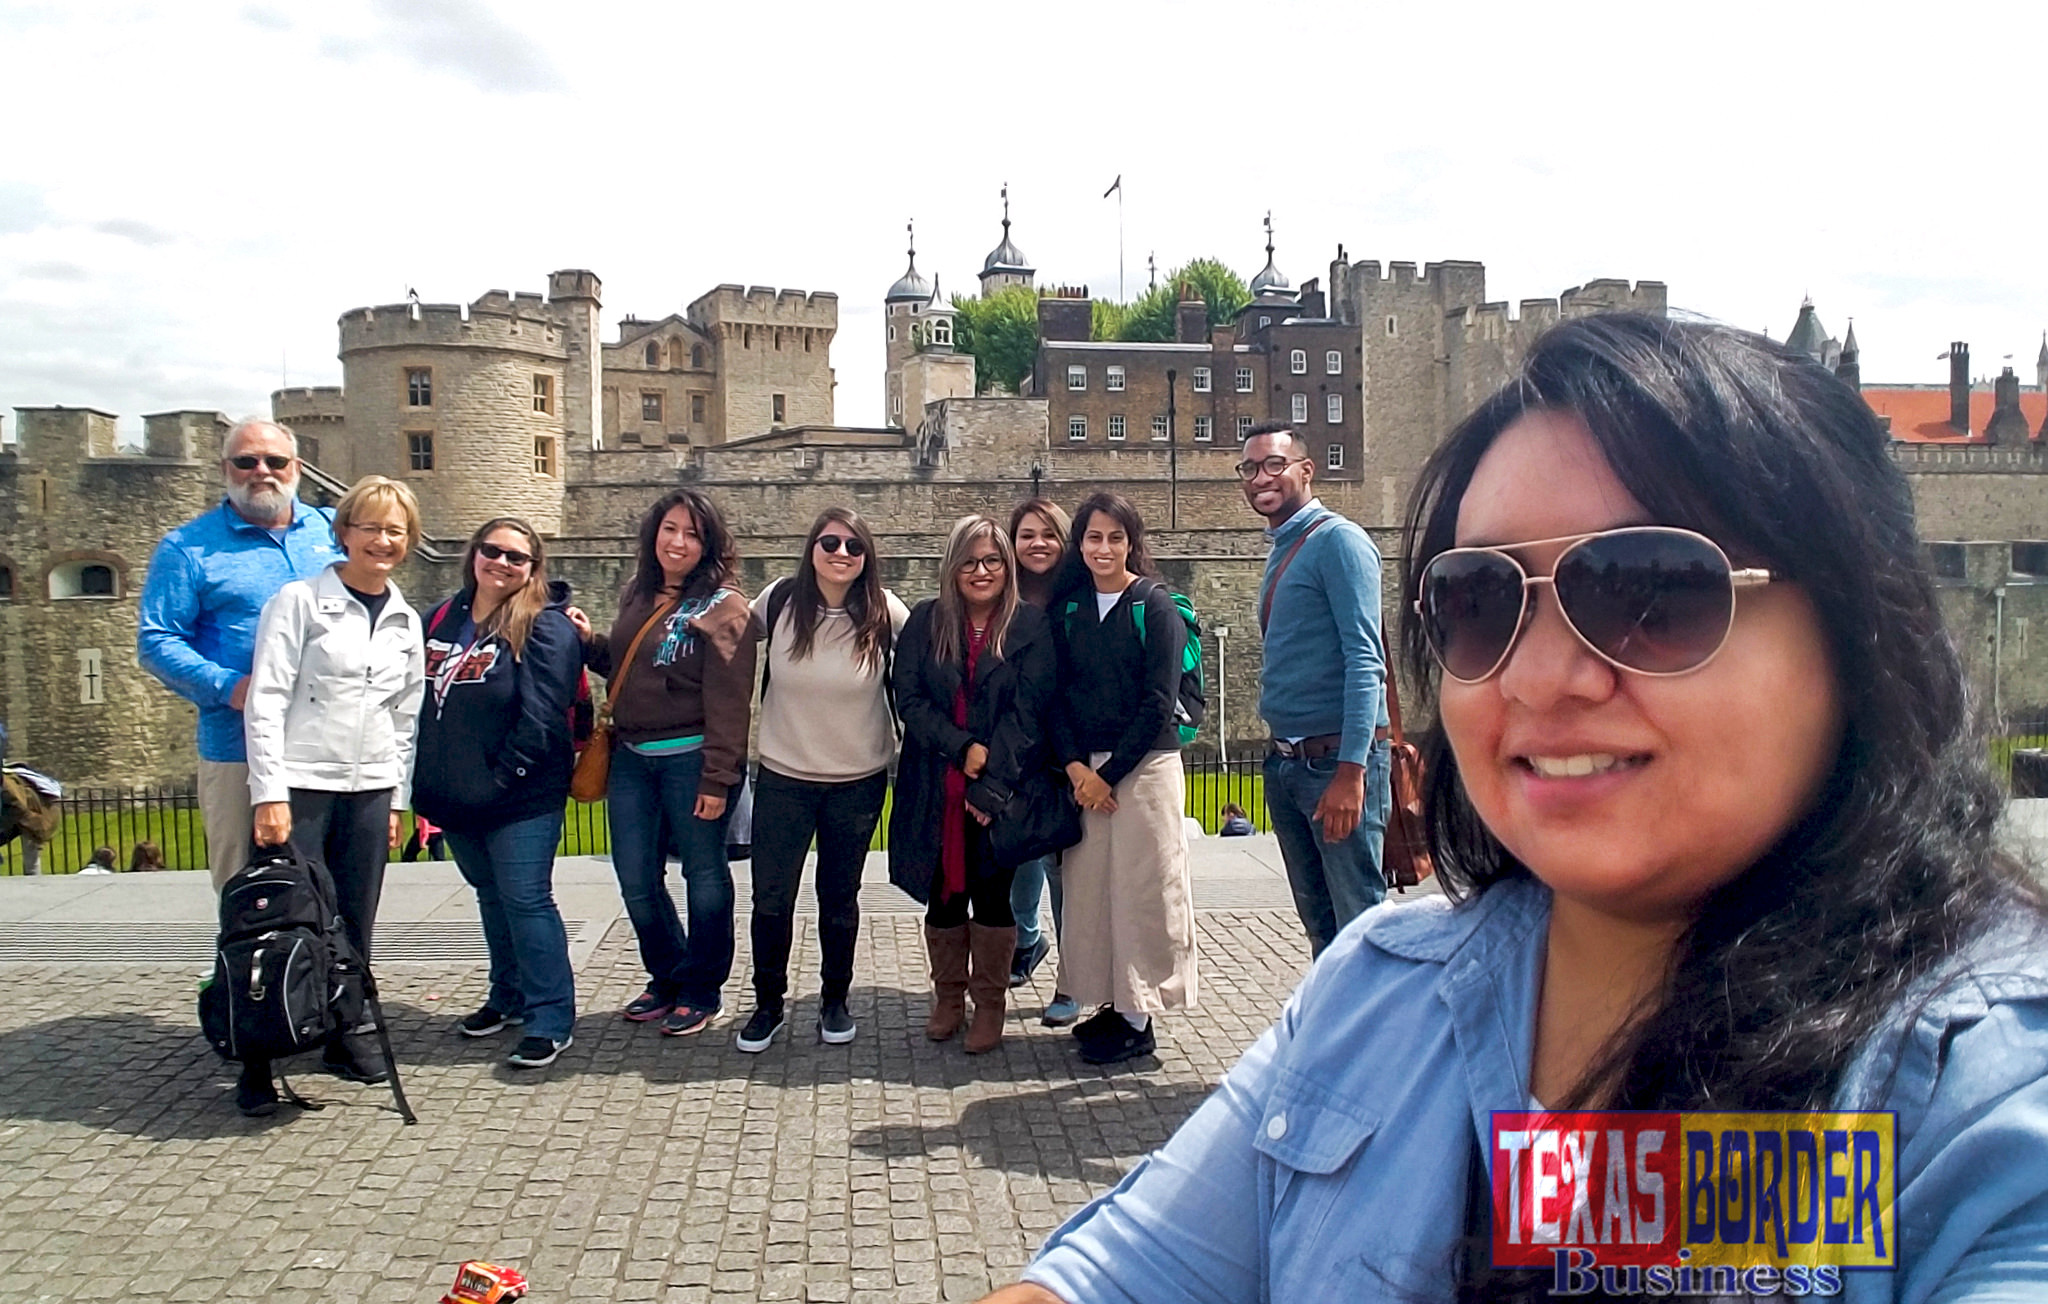 With the Tower of London in the background, the study abroad group included, left to right, Dr. Bruce Reed, Dr. Joan Reed, Amber Chavez, Lenice Villanueva, Tiffany Cantu, Claudia Estrada, Sophia Garza, Orlinda Cabrera, John Chance Williams; and front right, Maria Martinez. (UTRGV Courtesy Photo)